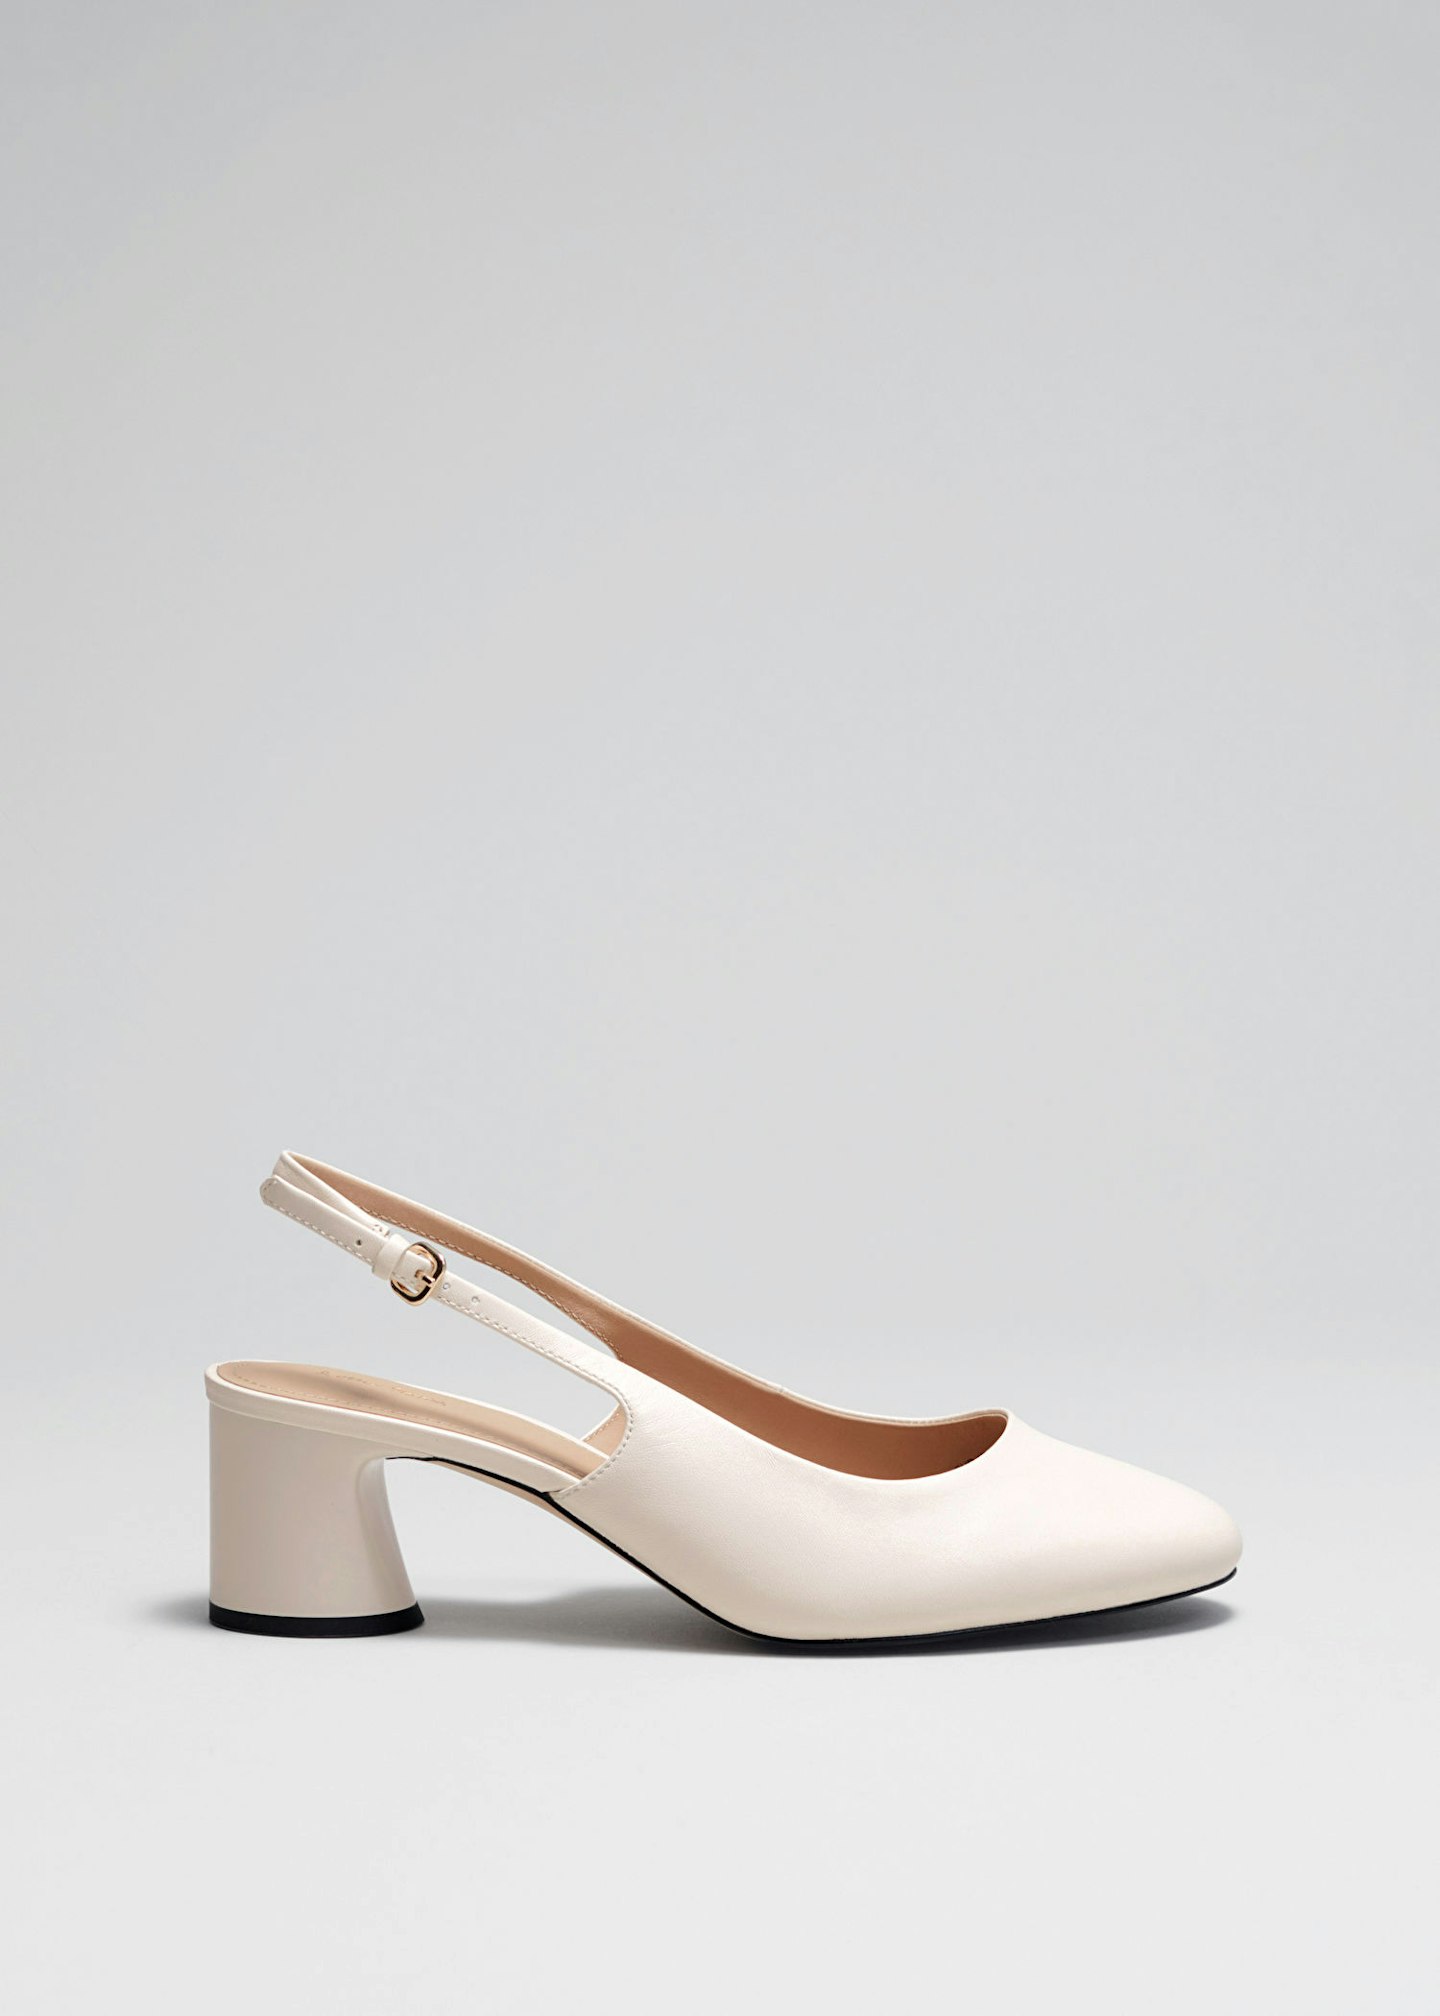 & Other Stories, Leather Slingback Heels